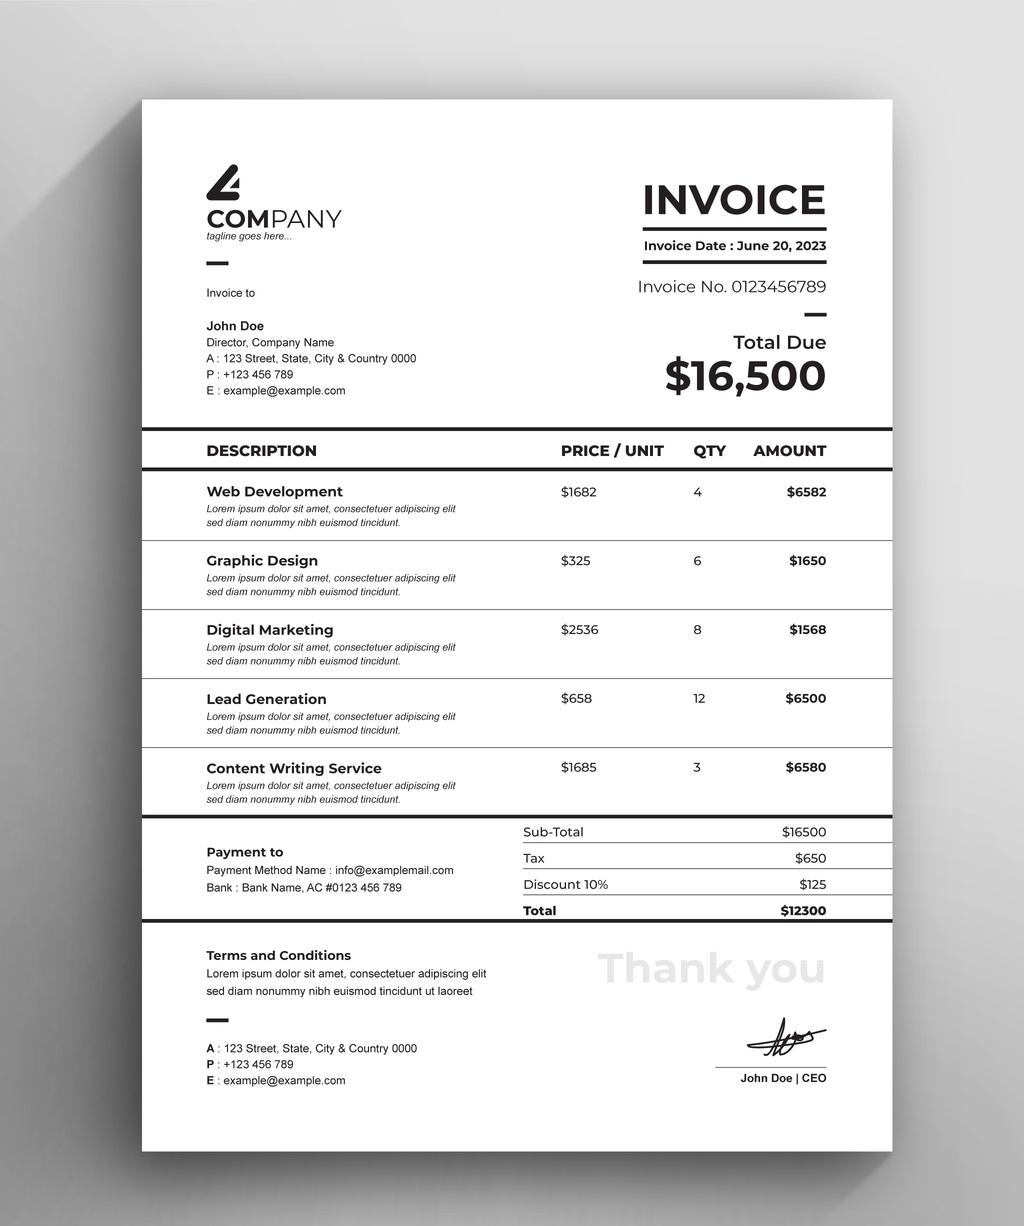 Invoice Layout (PSD Format)